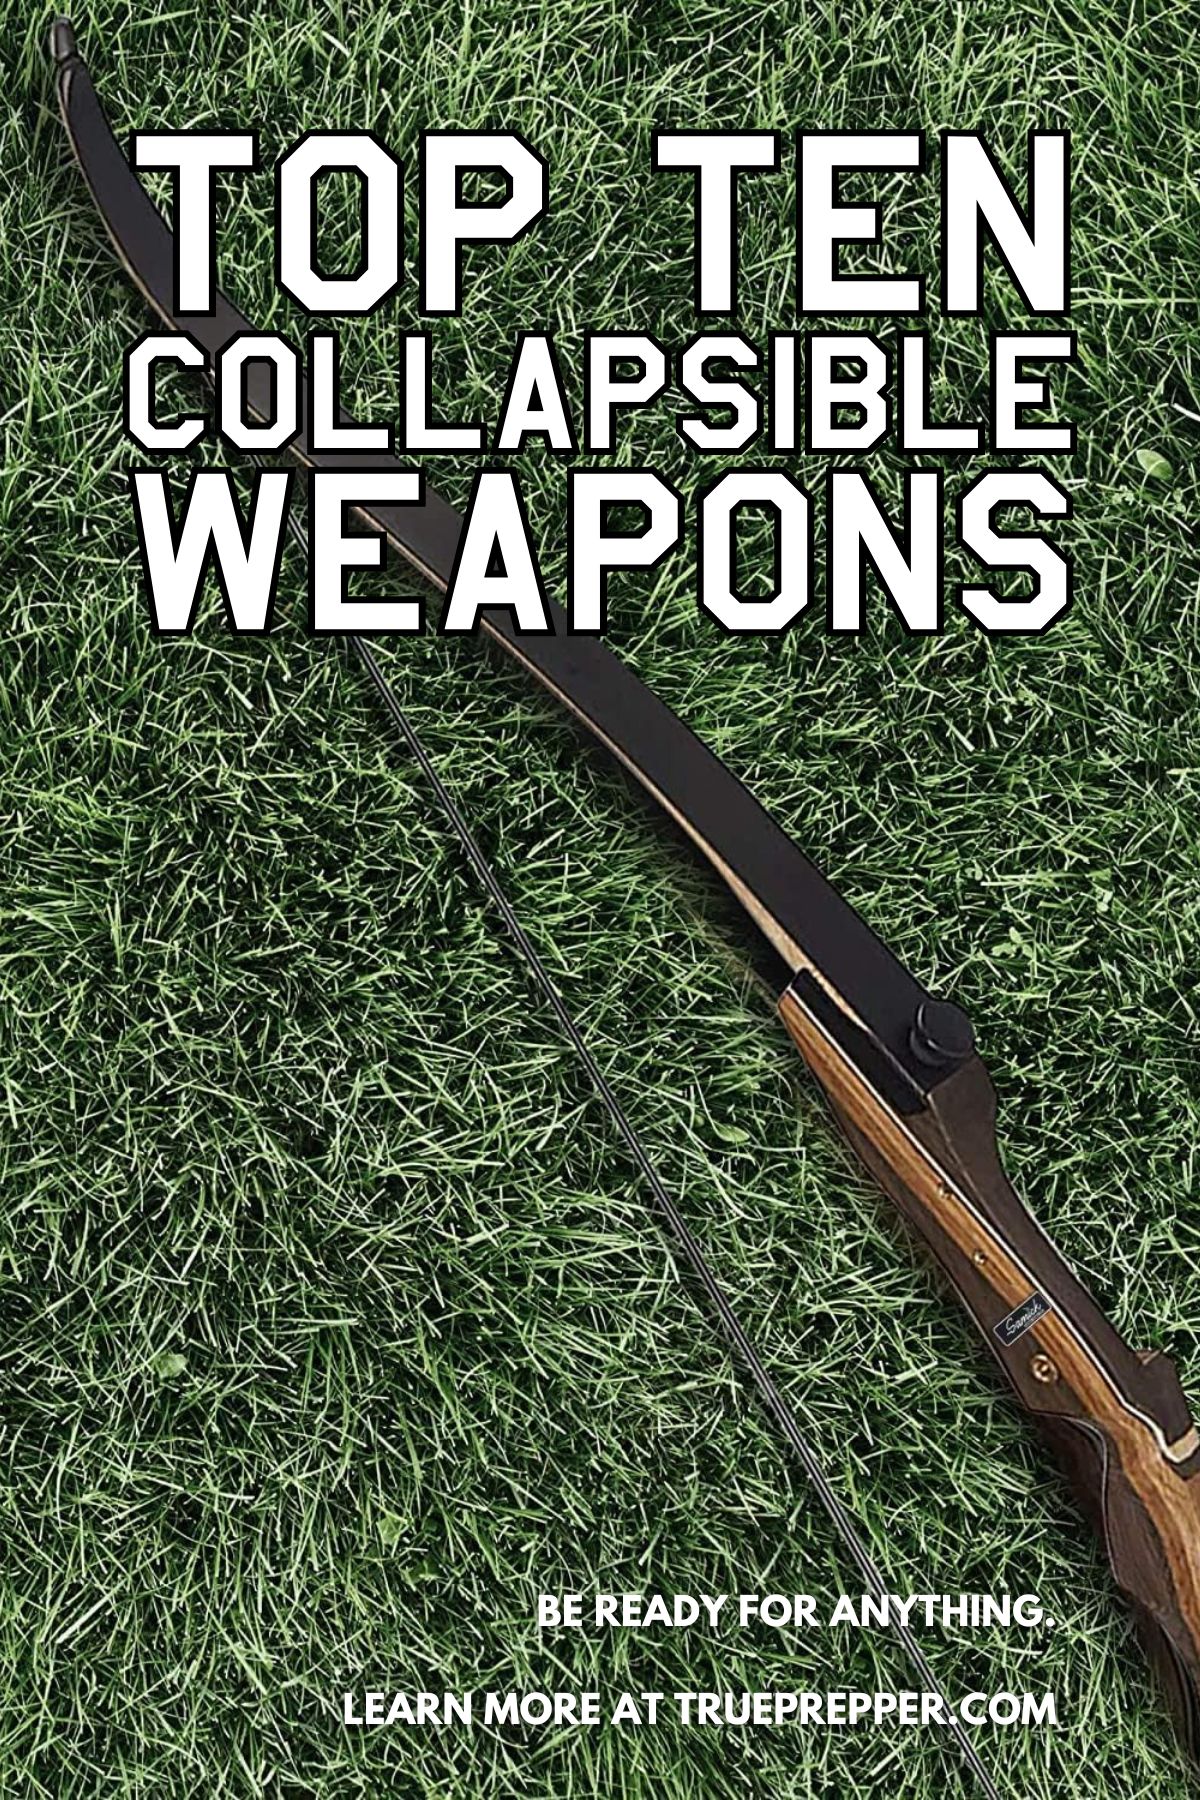 Top 10 Collapsible Weapons